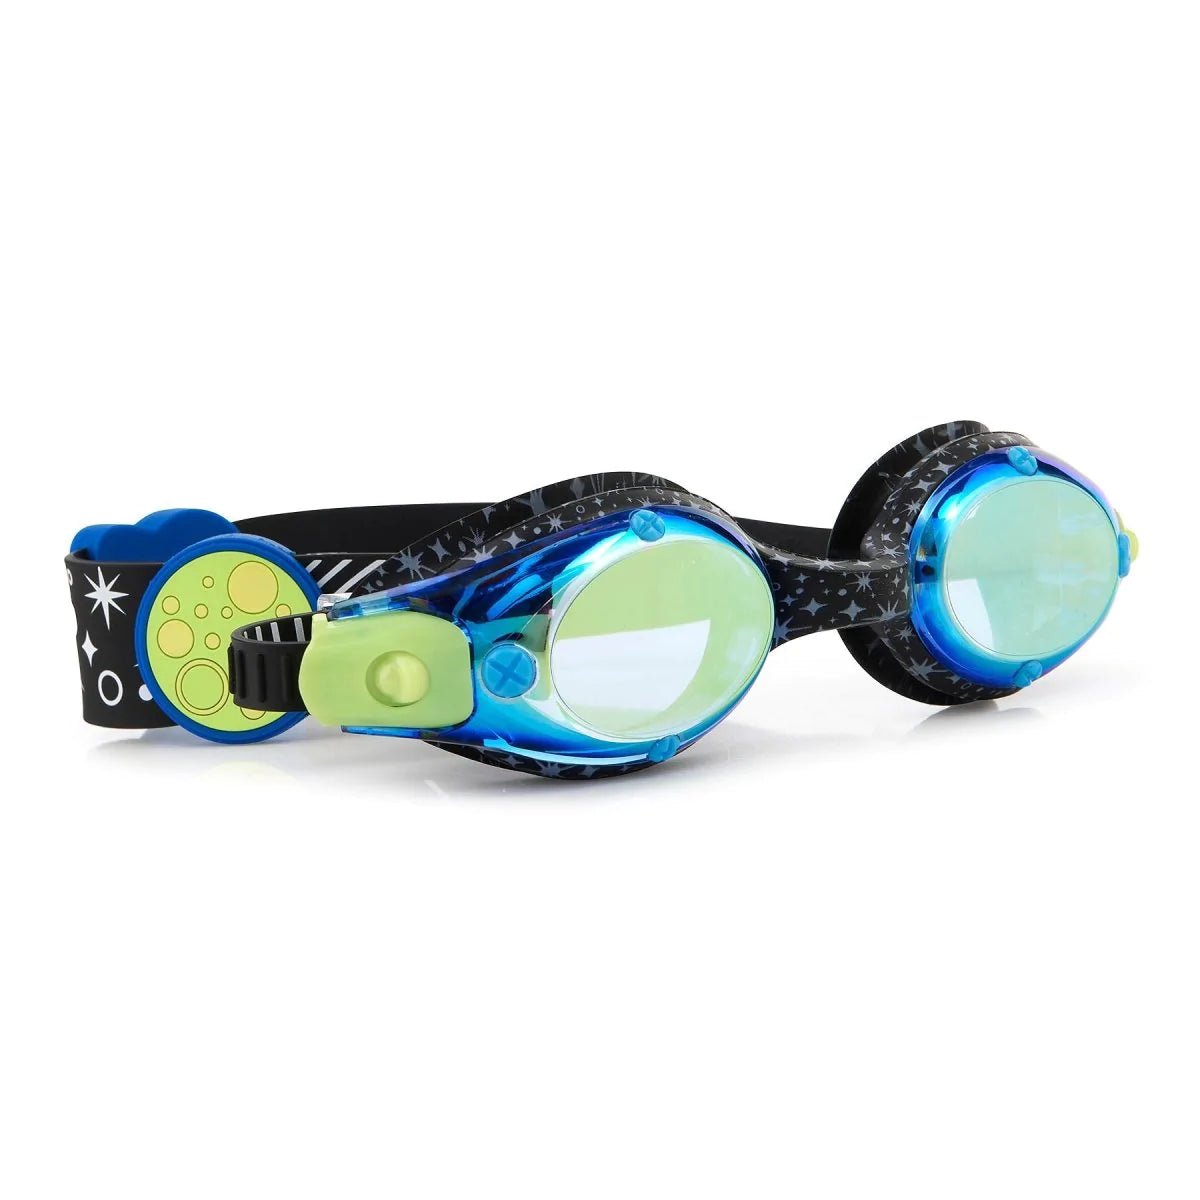 Top 16 Girls and Boys' Bling2o Swimming Goggles for Summertime - Mini Dreamers